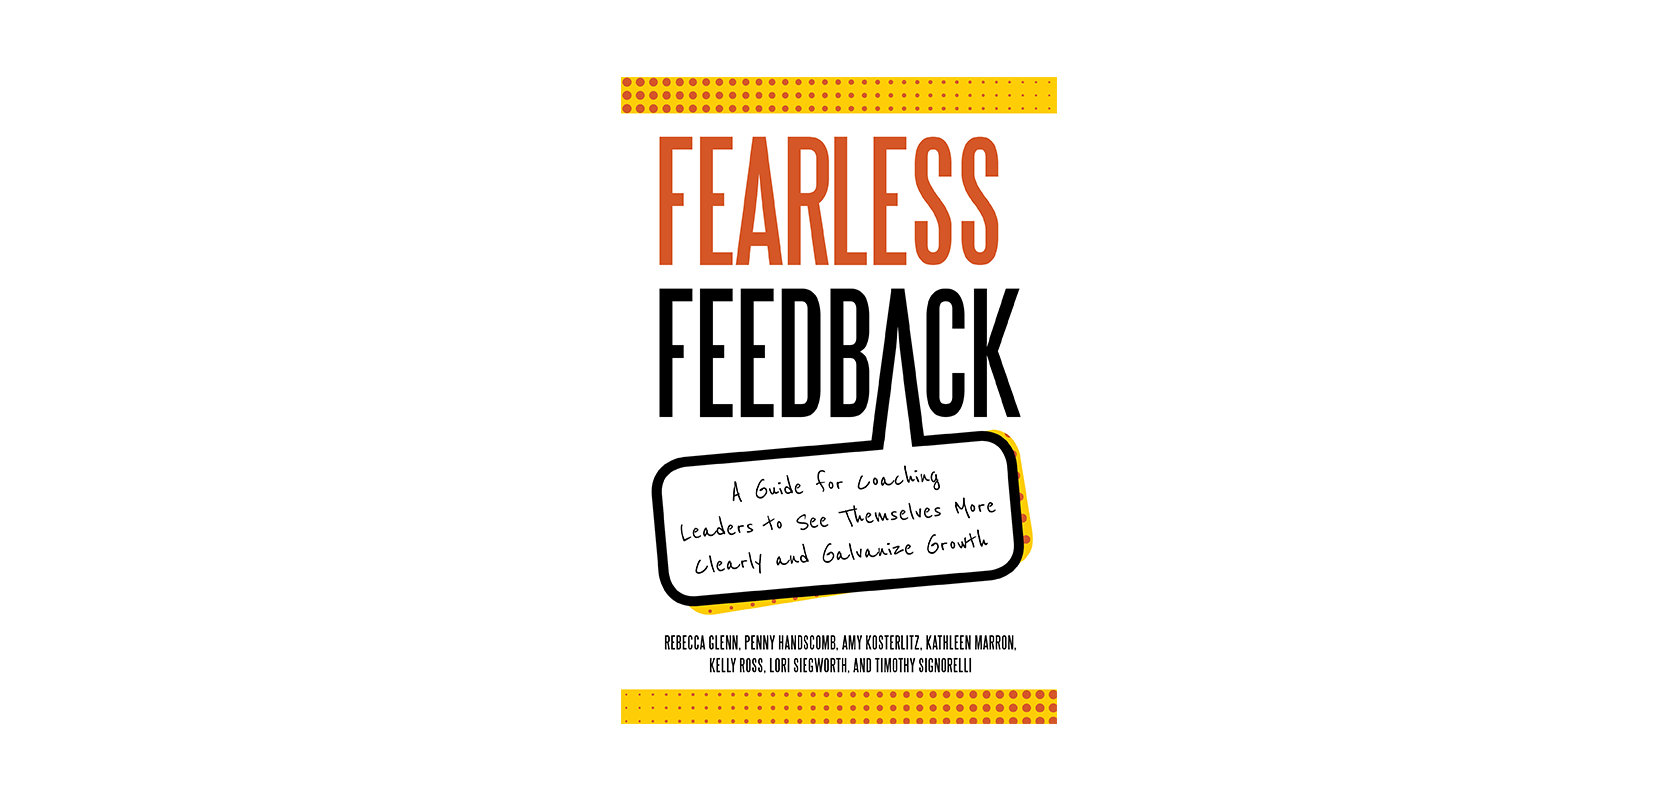 Announcing Fearless Feedback: A Guide for Coaching Leaders to See Themselves More Clearly and Galvanize Growth